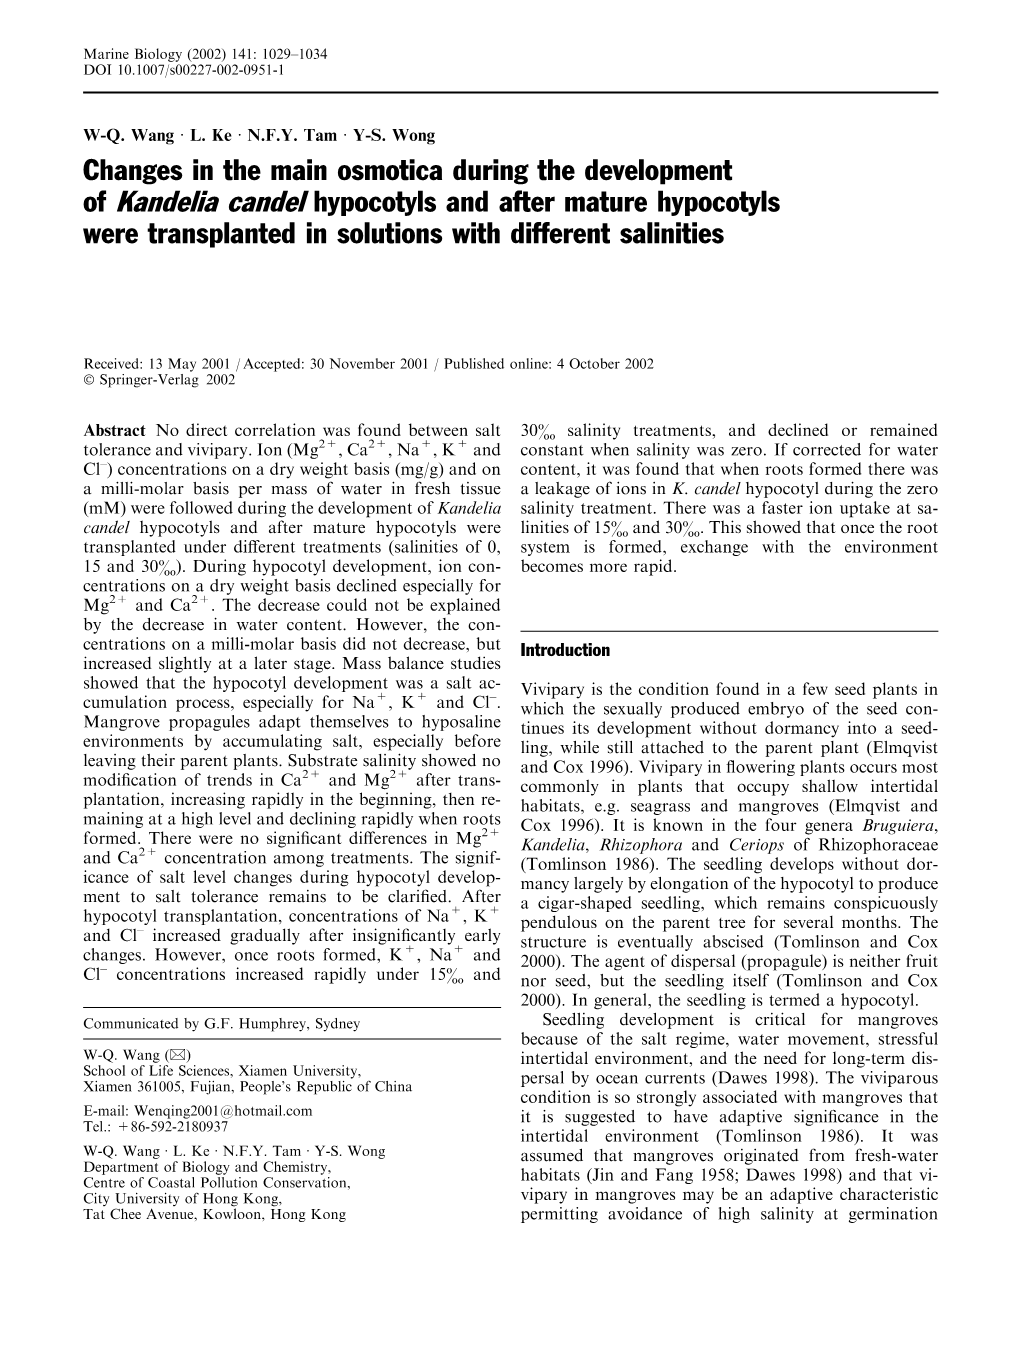 Changes in the Main Osmotica During the Development of Kandelia Candel Hypocotyls and After Mature Hypocotyls Were Transplanted in Solutions with Different Salinities